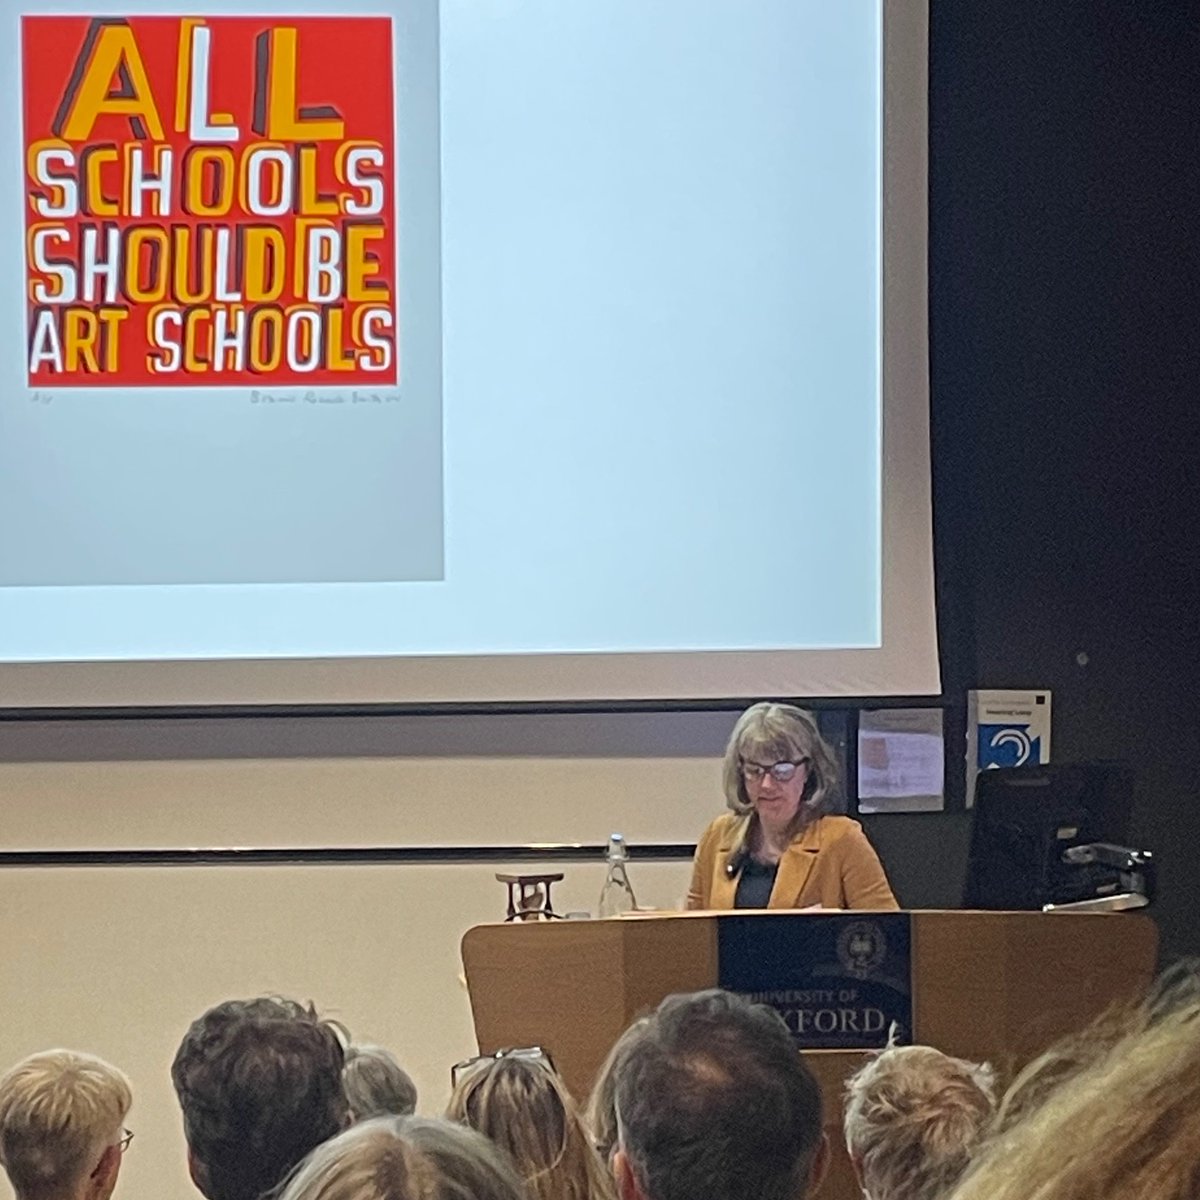 Huge thanks to our Exhibitions Curator, Amanda Jewell @RadleyGallery for an excellent talk to a full house as part of Jericho Art Weeks @OxonArtweeks at @OxUniMaths on why all schools should be art schools and why art in all its forms is an absolute necessity and not a luxury.